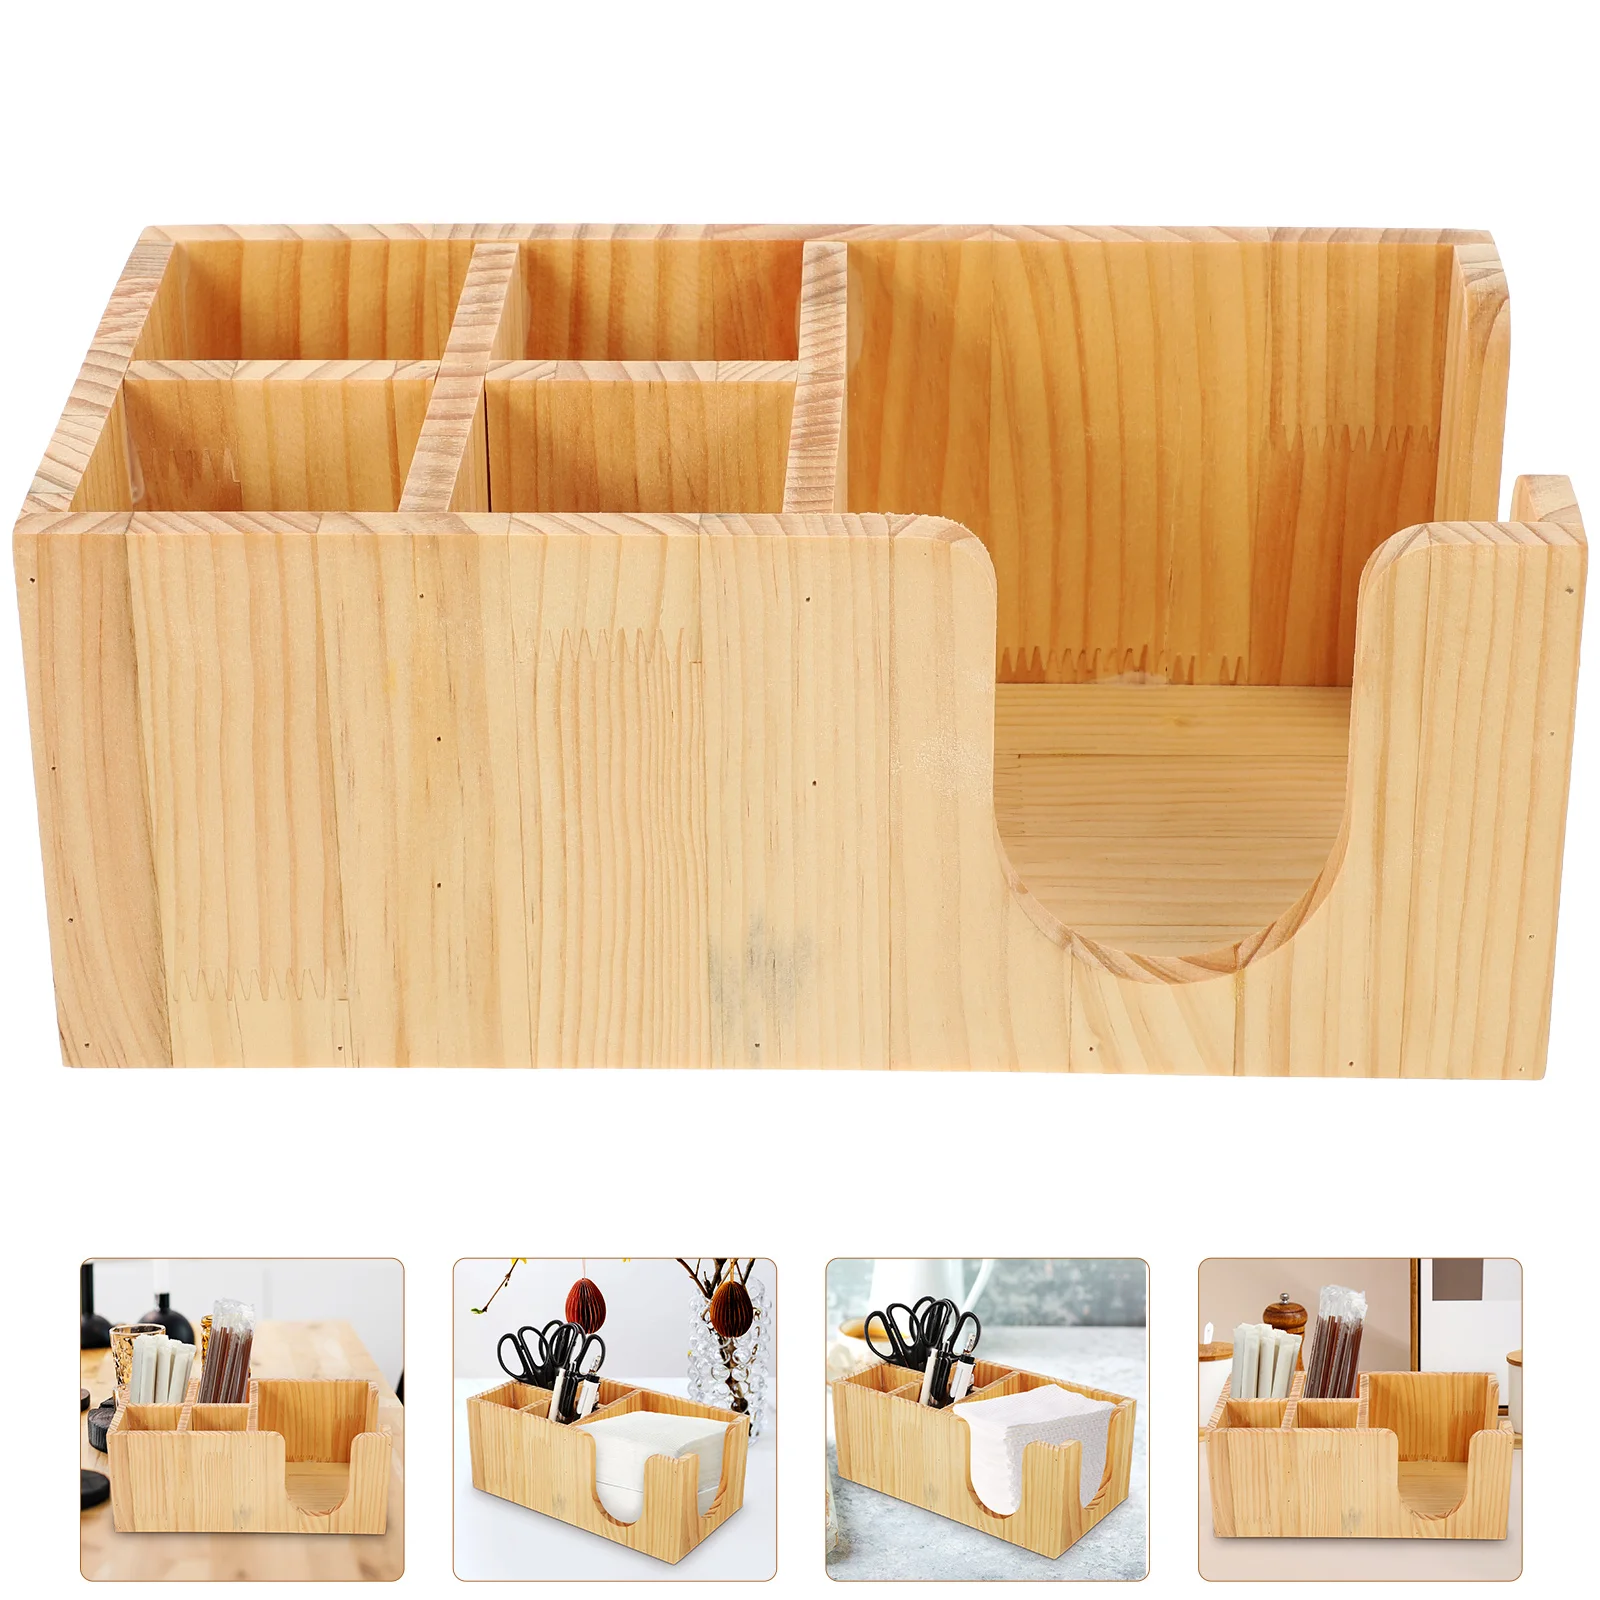 

Coffee Organizer Station Tea Bar Holder Syrup Condiment Countertop Box Wooden Storage Office Cup Table Rack Packet Sugar Tray